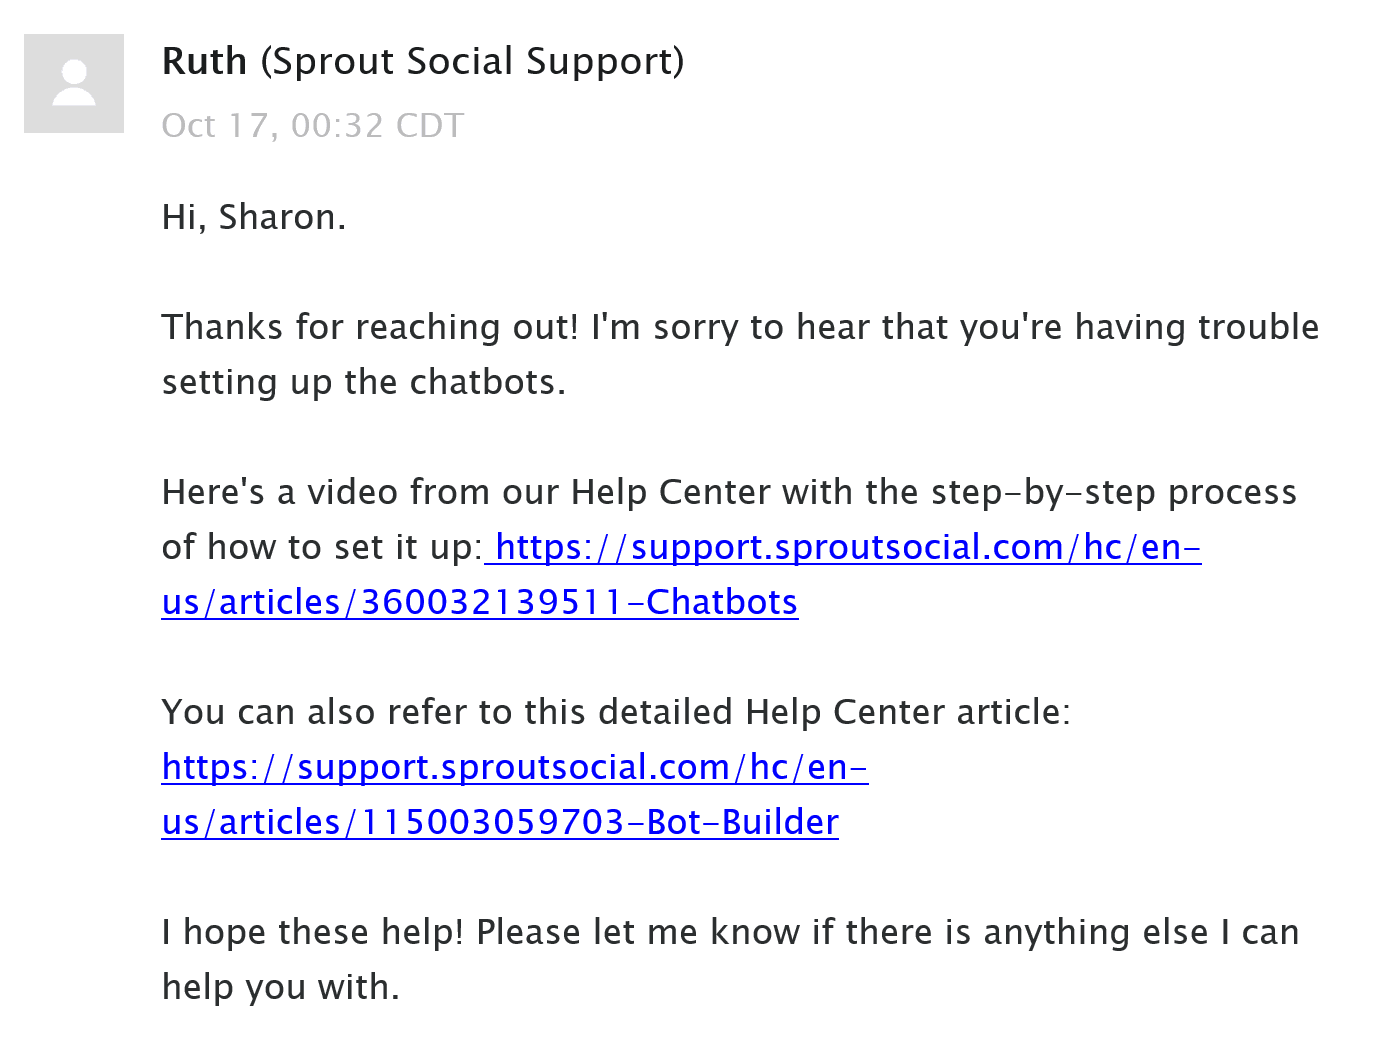 sprout-social-support1